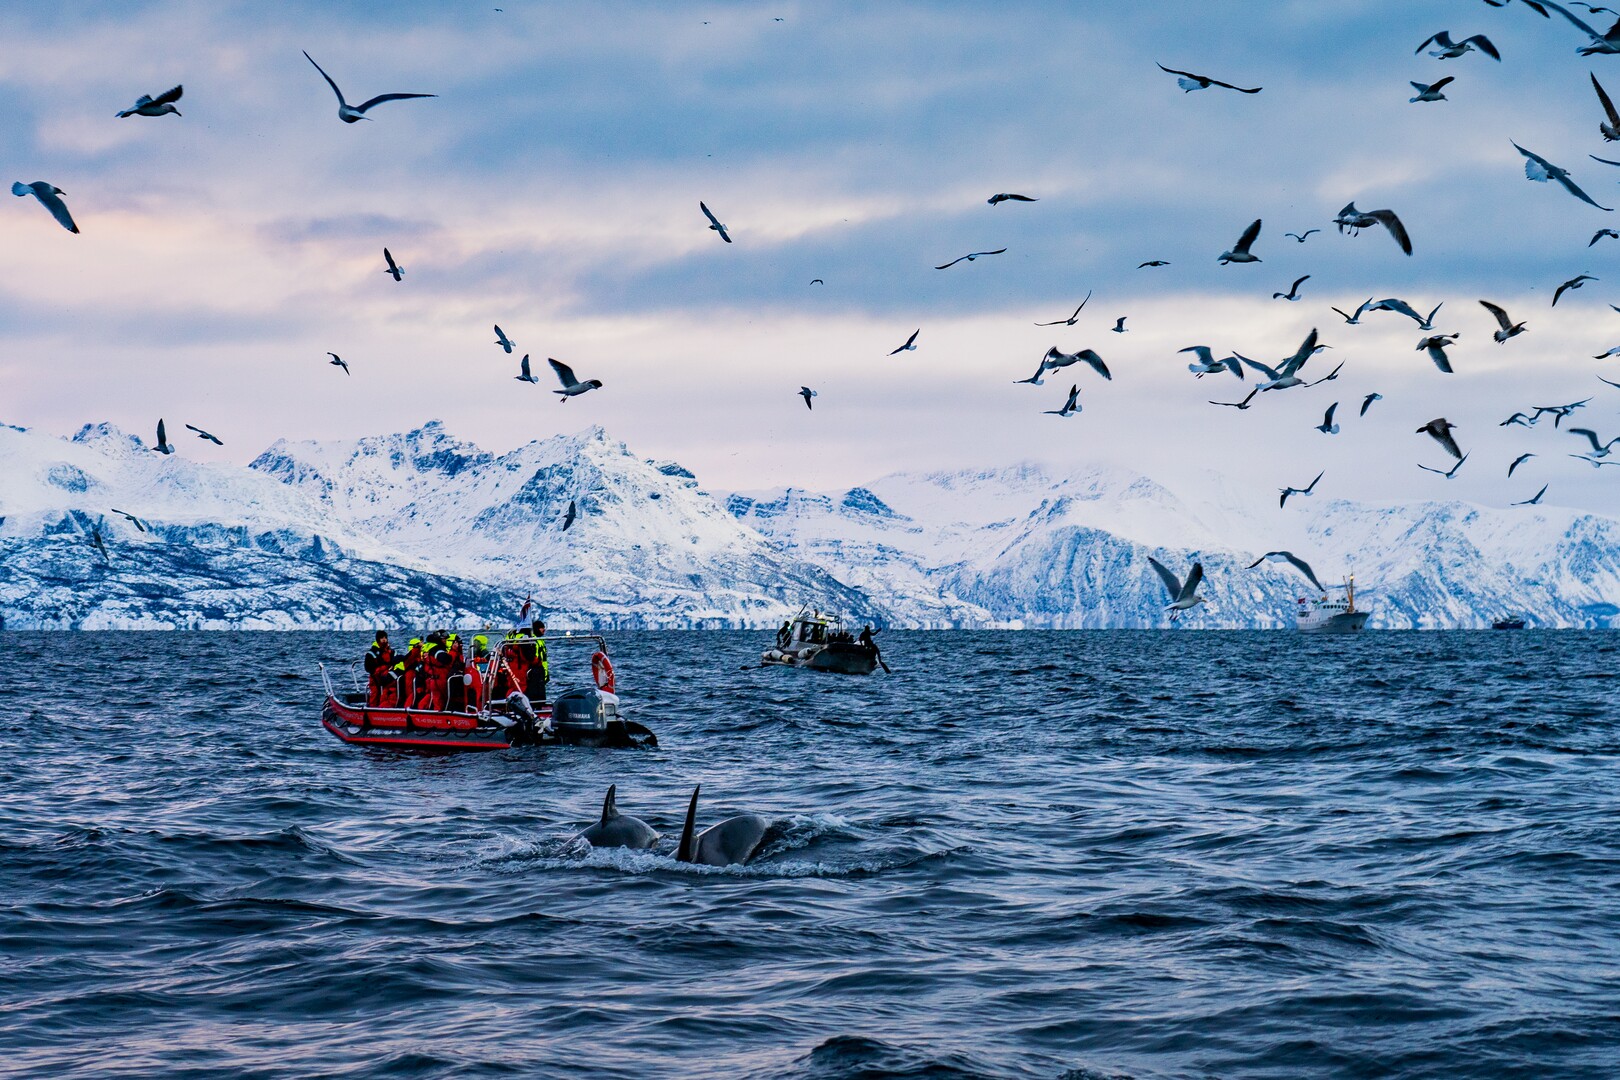 Herring in the fjord makes both orcas and seagulls come © Petr Pavlíček / Visit Lyngenfjord